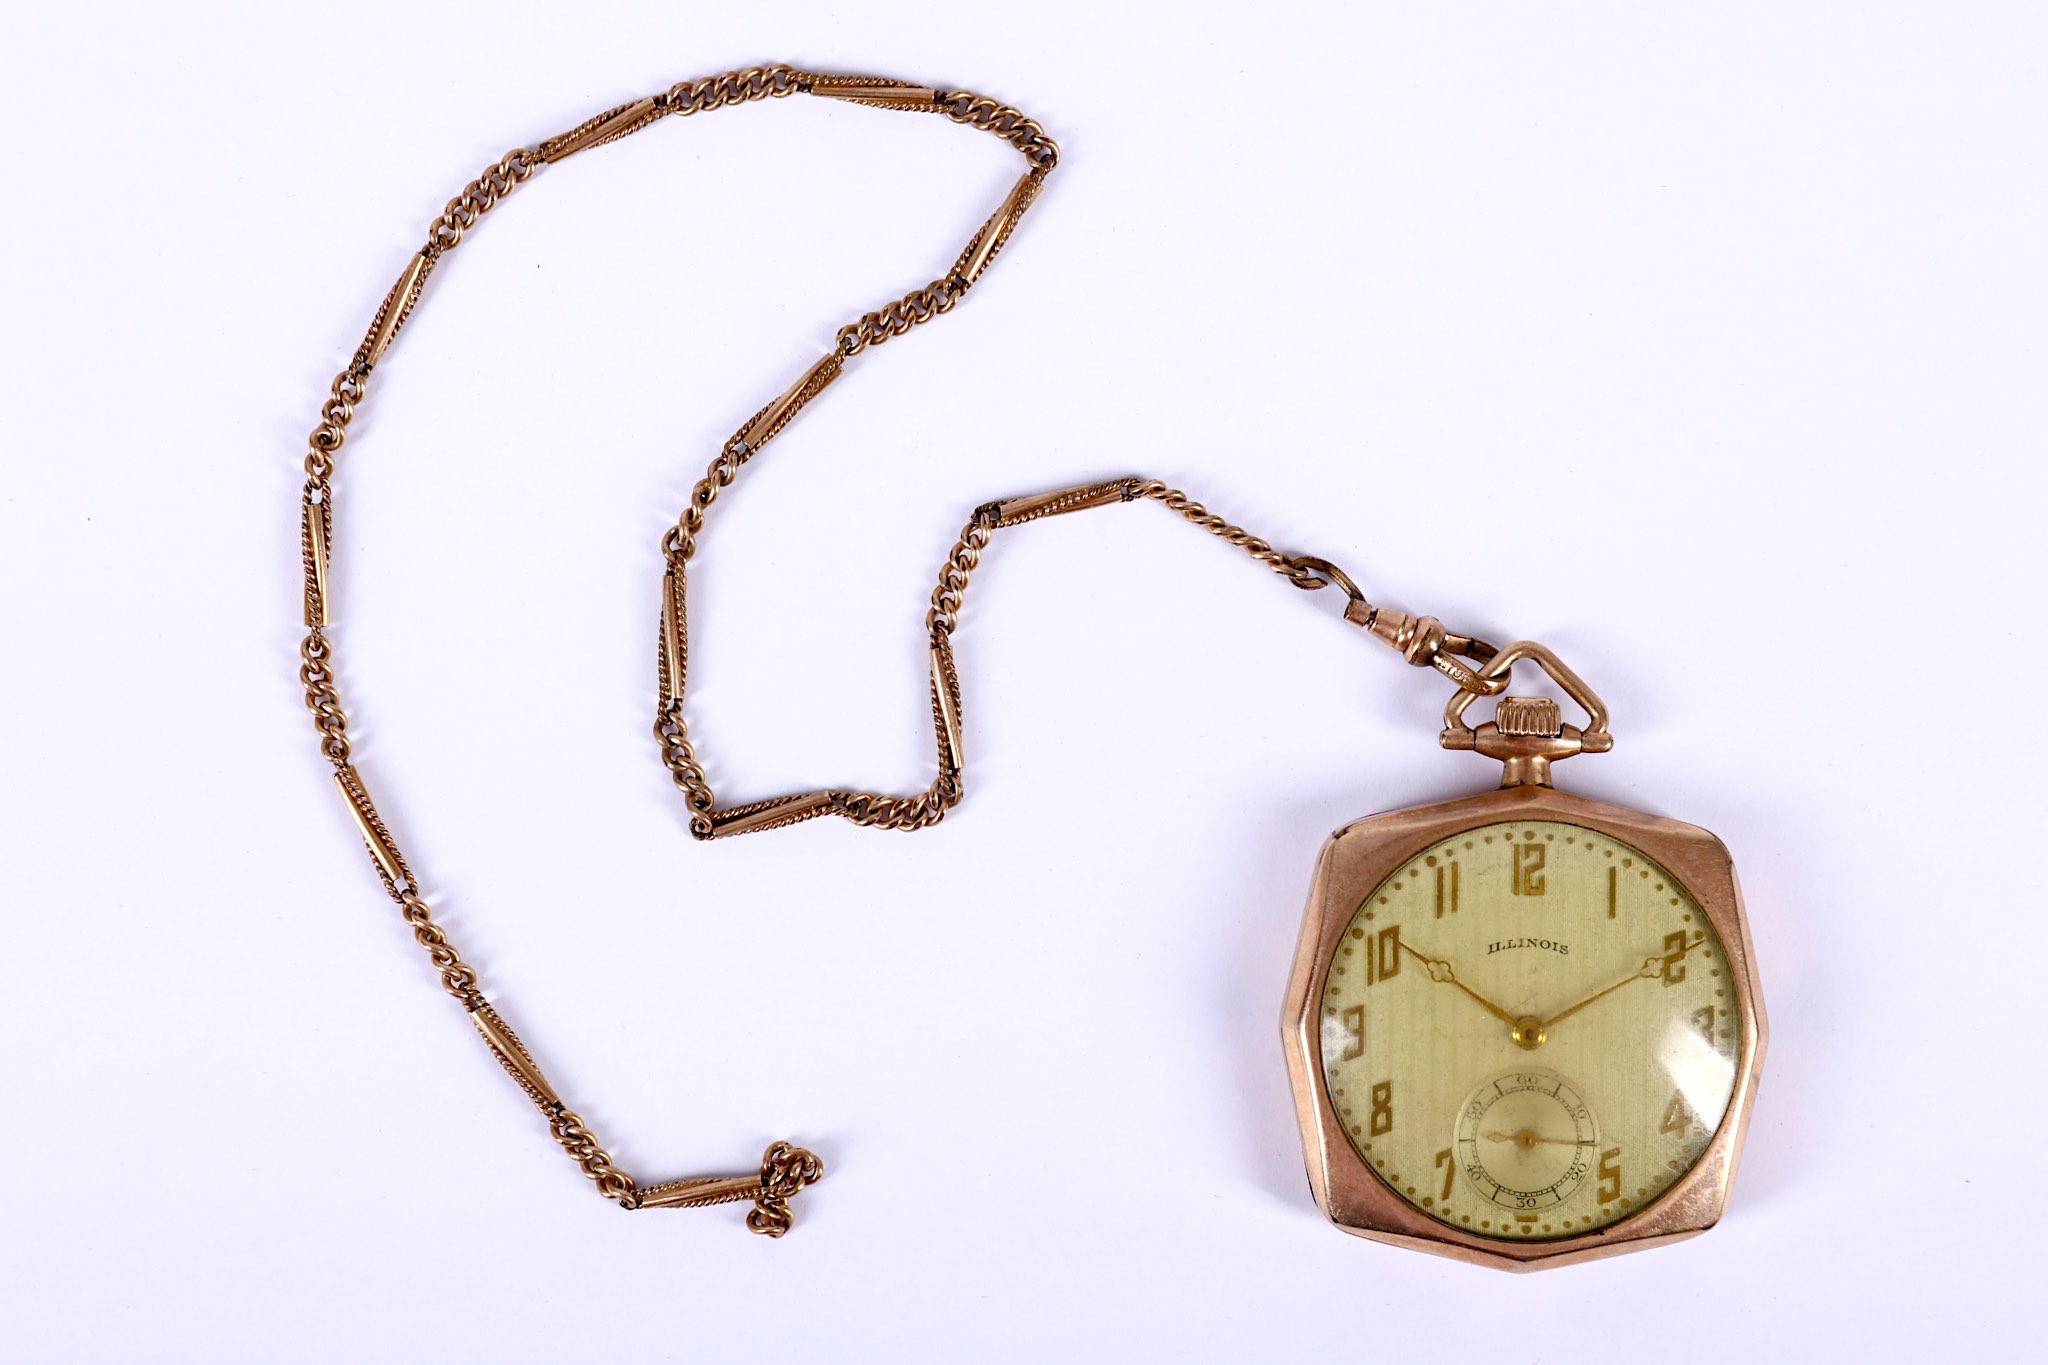 An American Art Deco, Springfield of Illinois Watch Co., gold plated gentleman's pocket watch on a